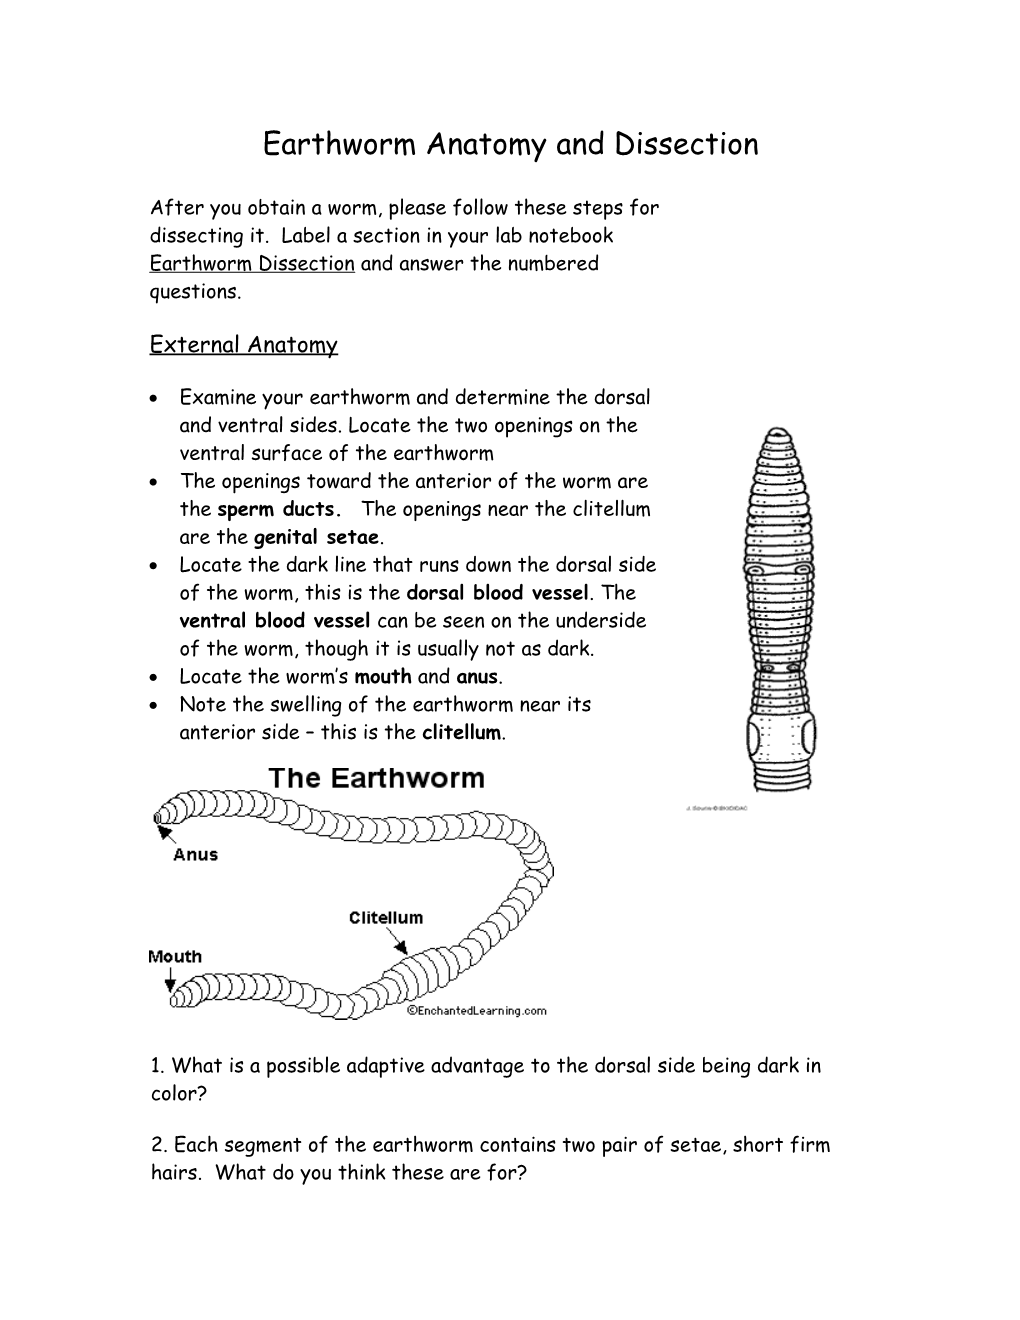 Earthworm Anatomy and Dissection